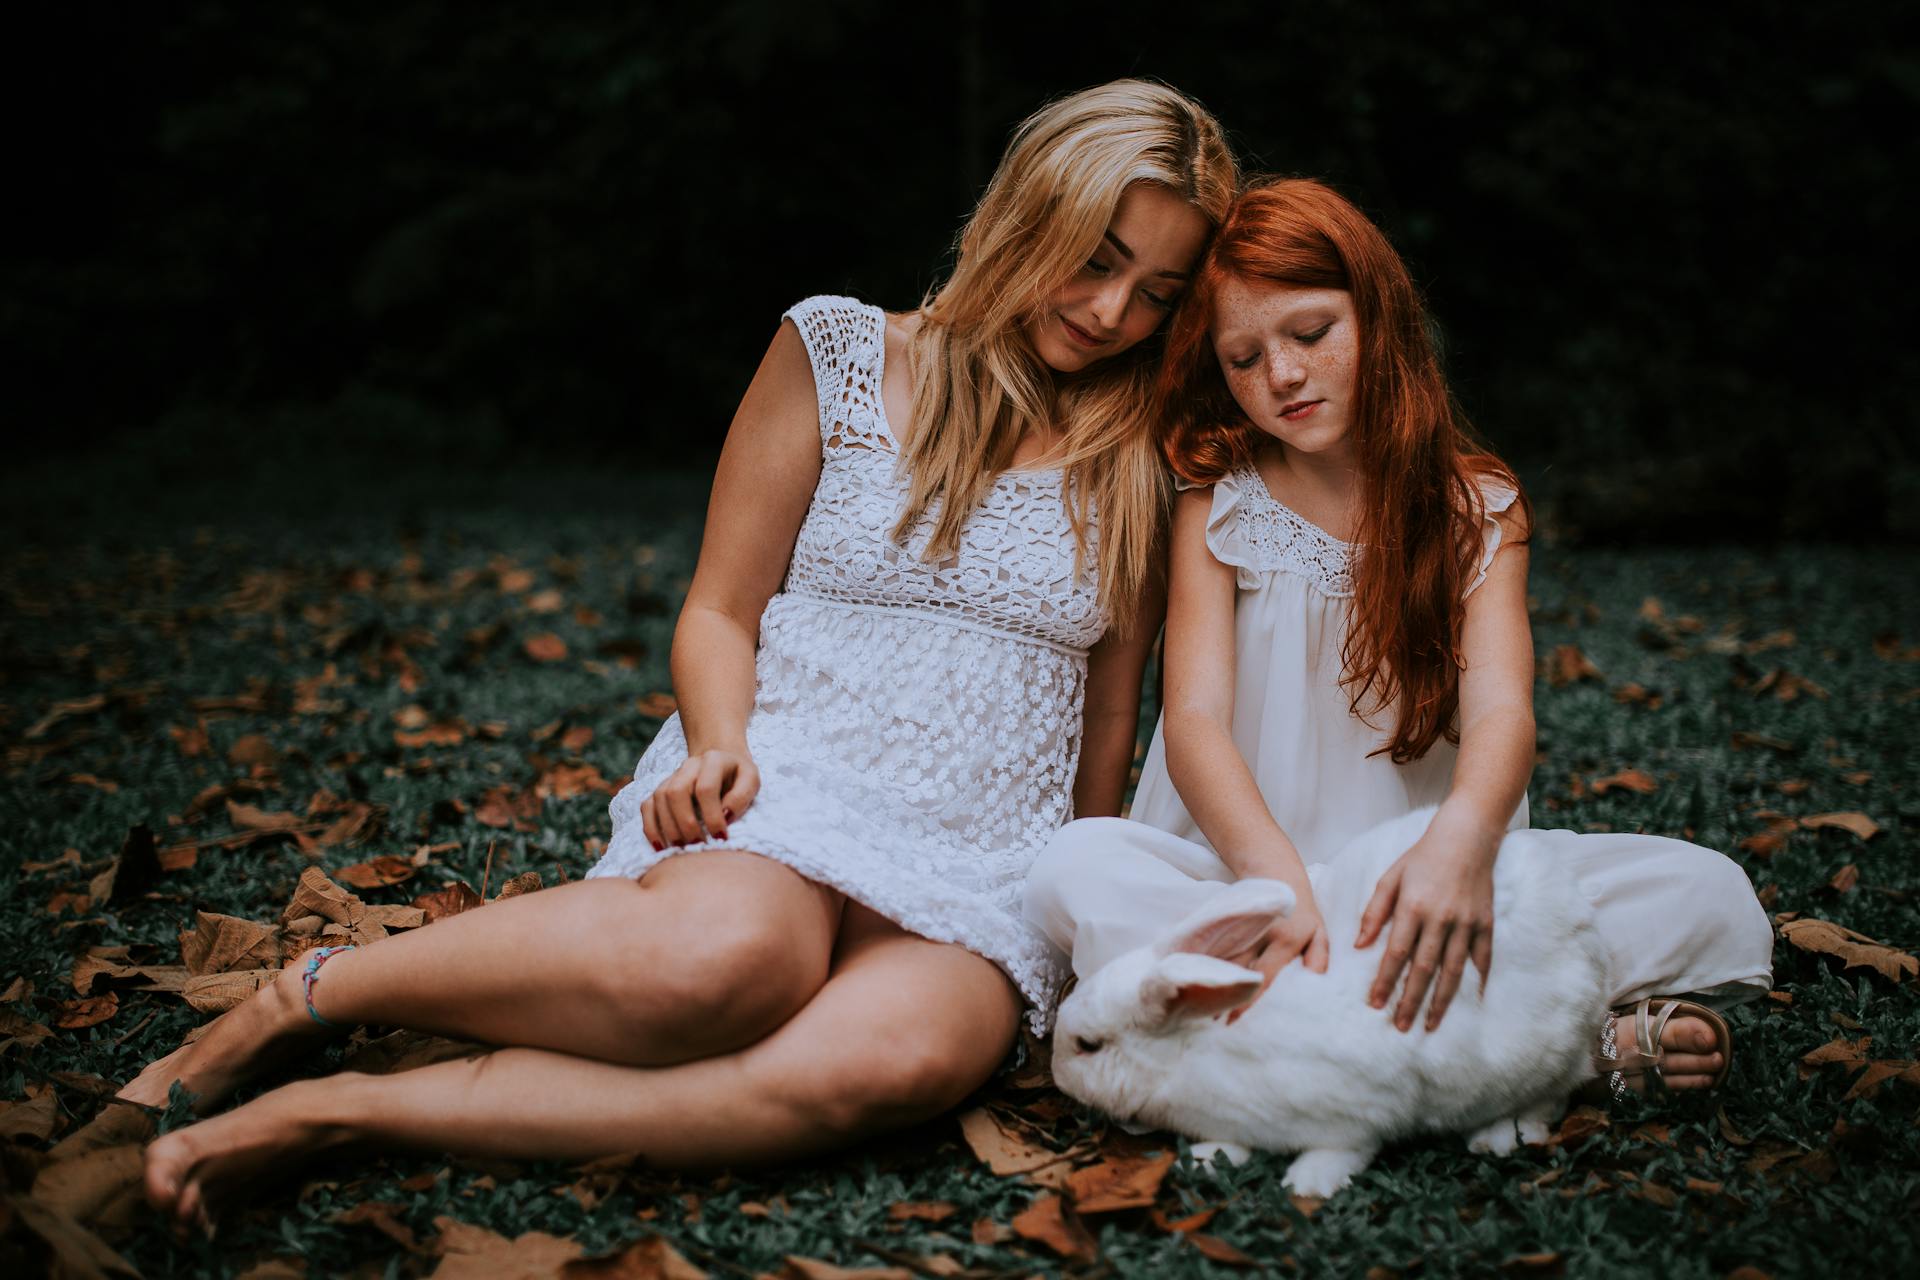 A woman sitting on the grass with a little girl | Source: Pexels